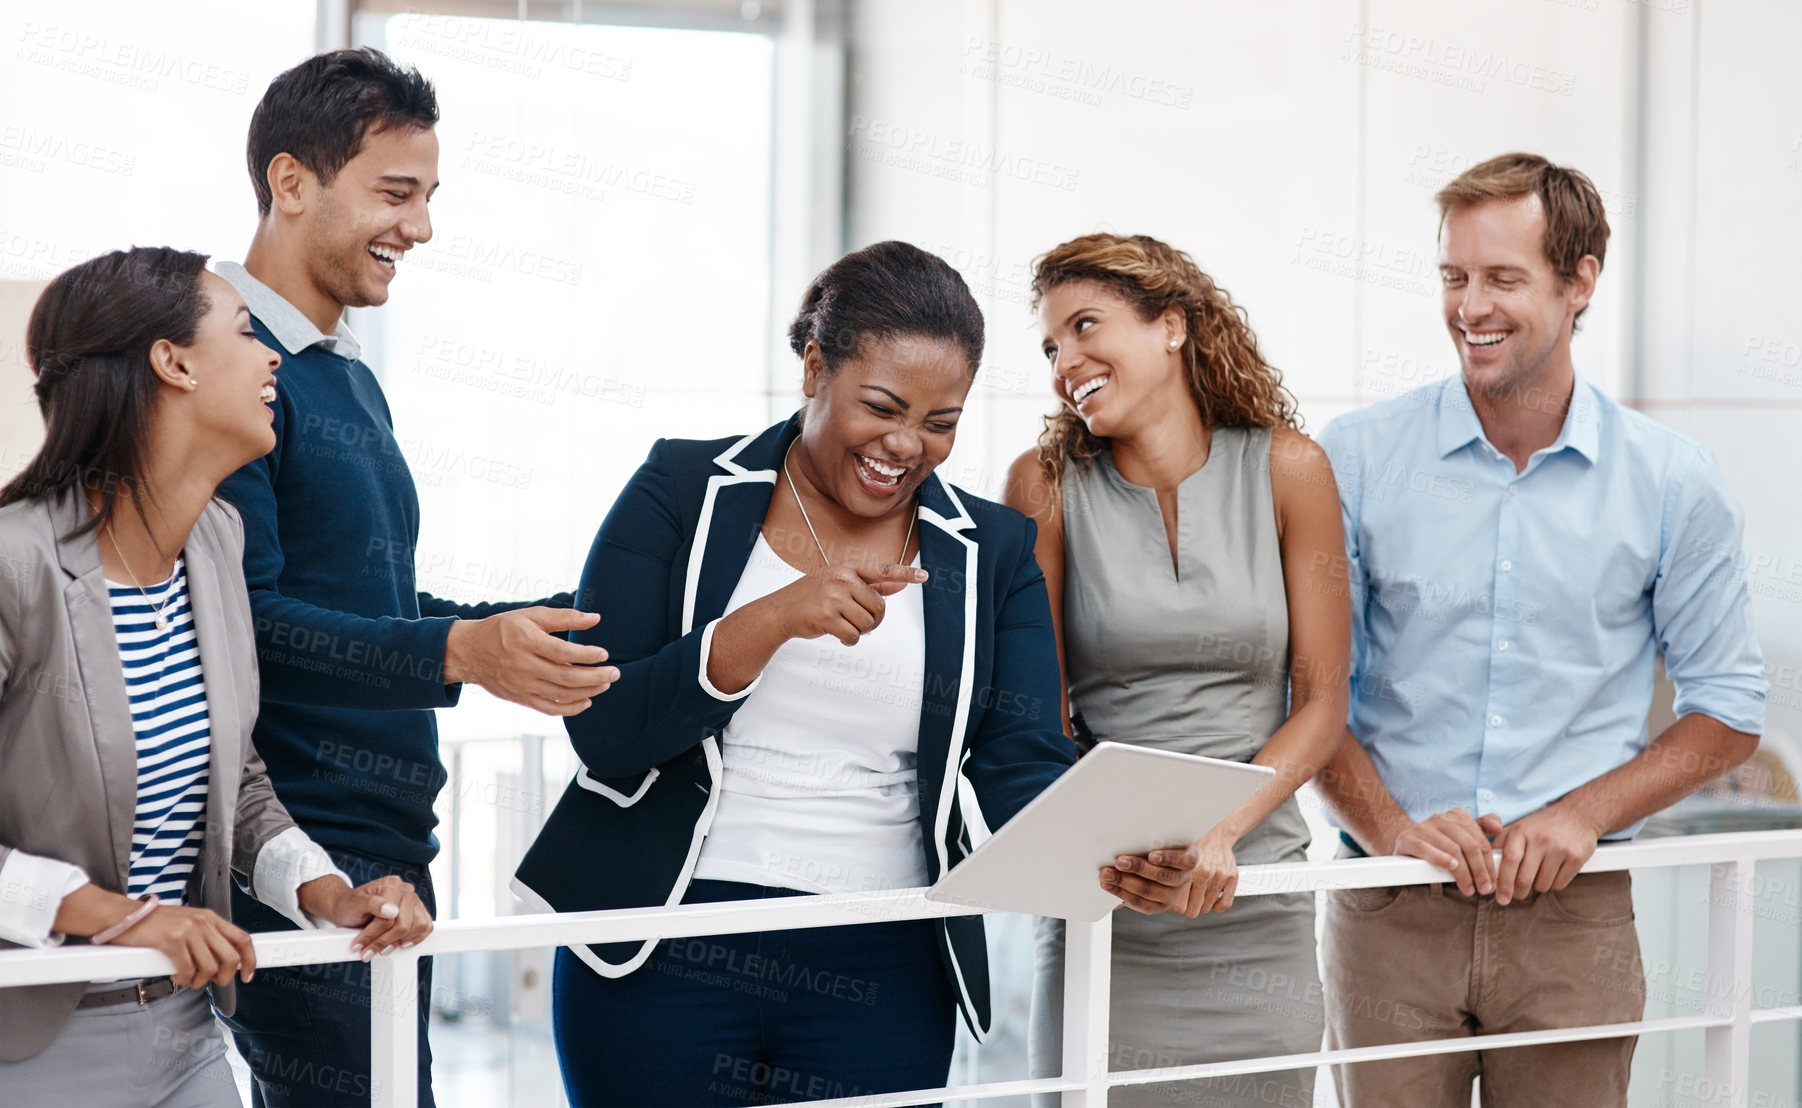 Buy stock photo Shot of a happy group of colleagues sharing a laugh together in the office